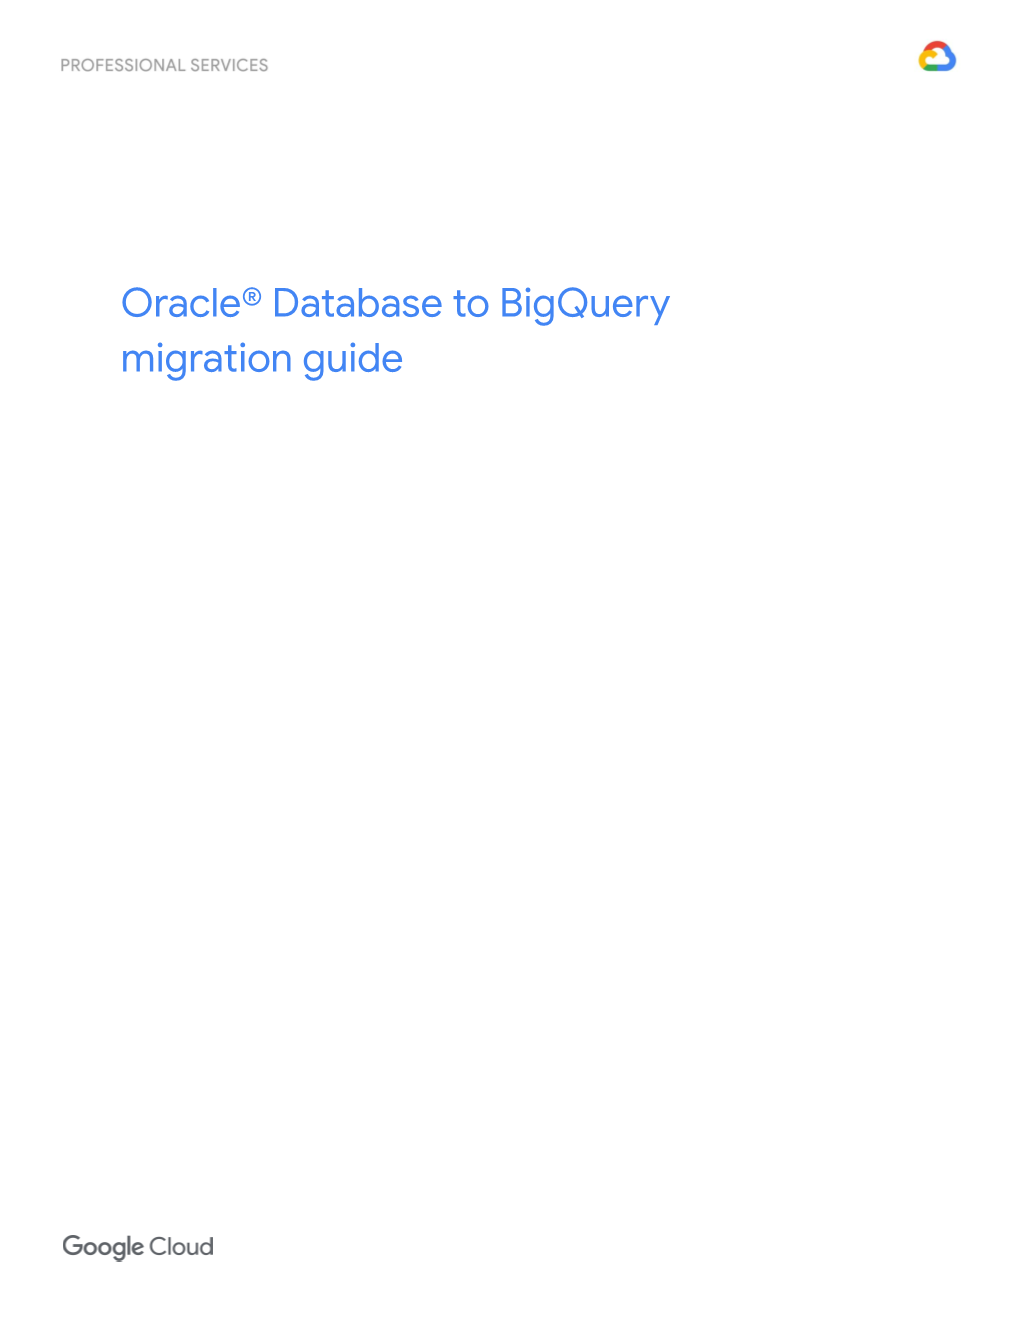 Oracle / Exadata to Bigquery Migration Guide